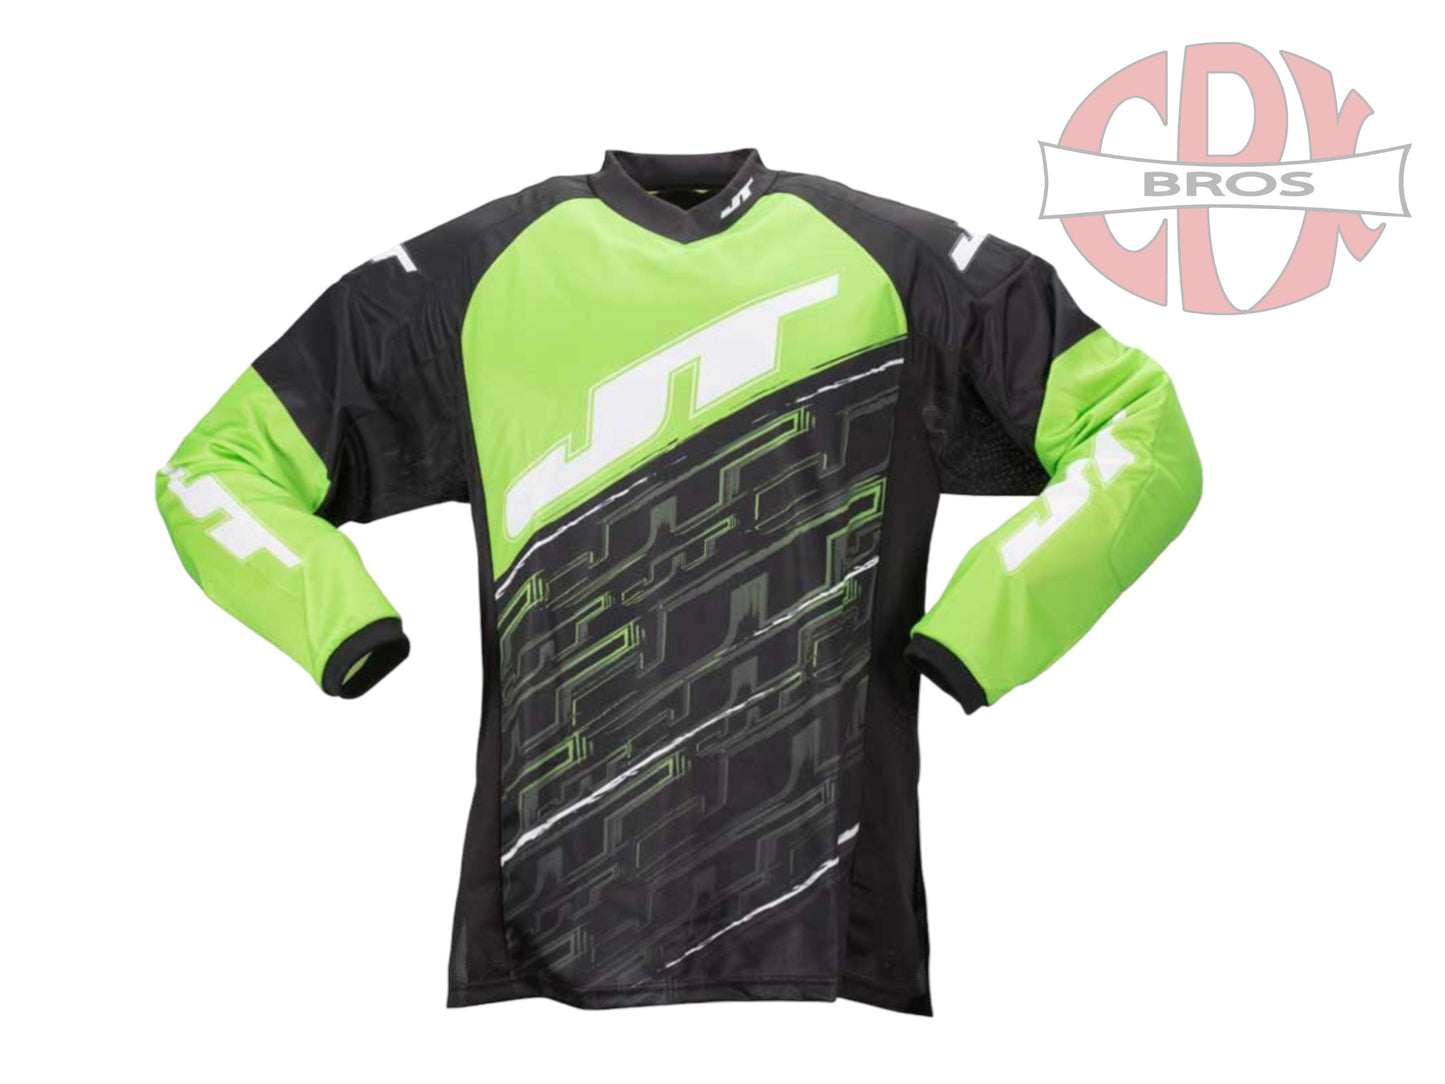 Used New Jt Paintball Jersey - Neon Green 3XL Paintball Gun from CPXBrosPaintball Buy/Sell/Trade Paintball Markers, Paintball Hoppers, Paintball Masks, and Hormesis Headbands